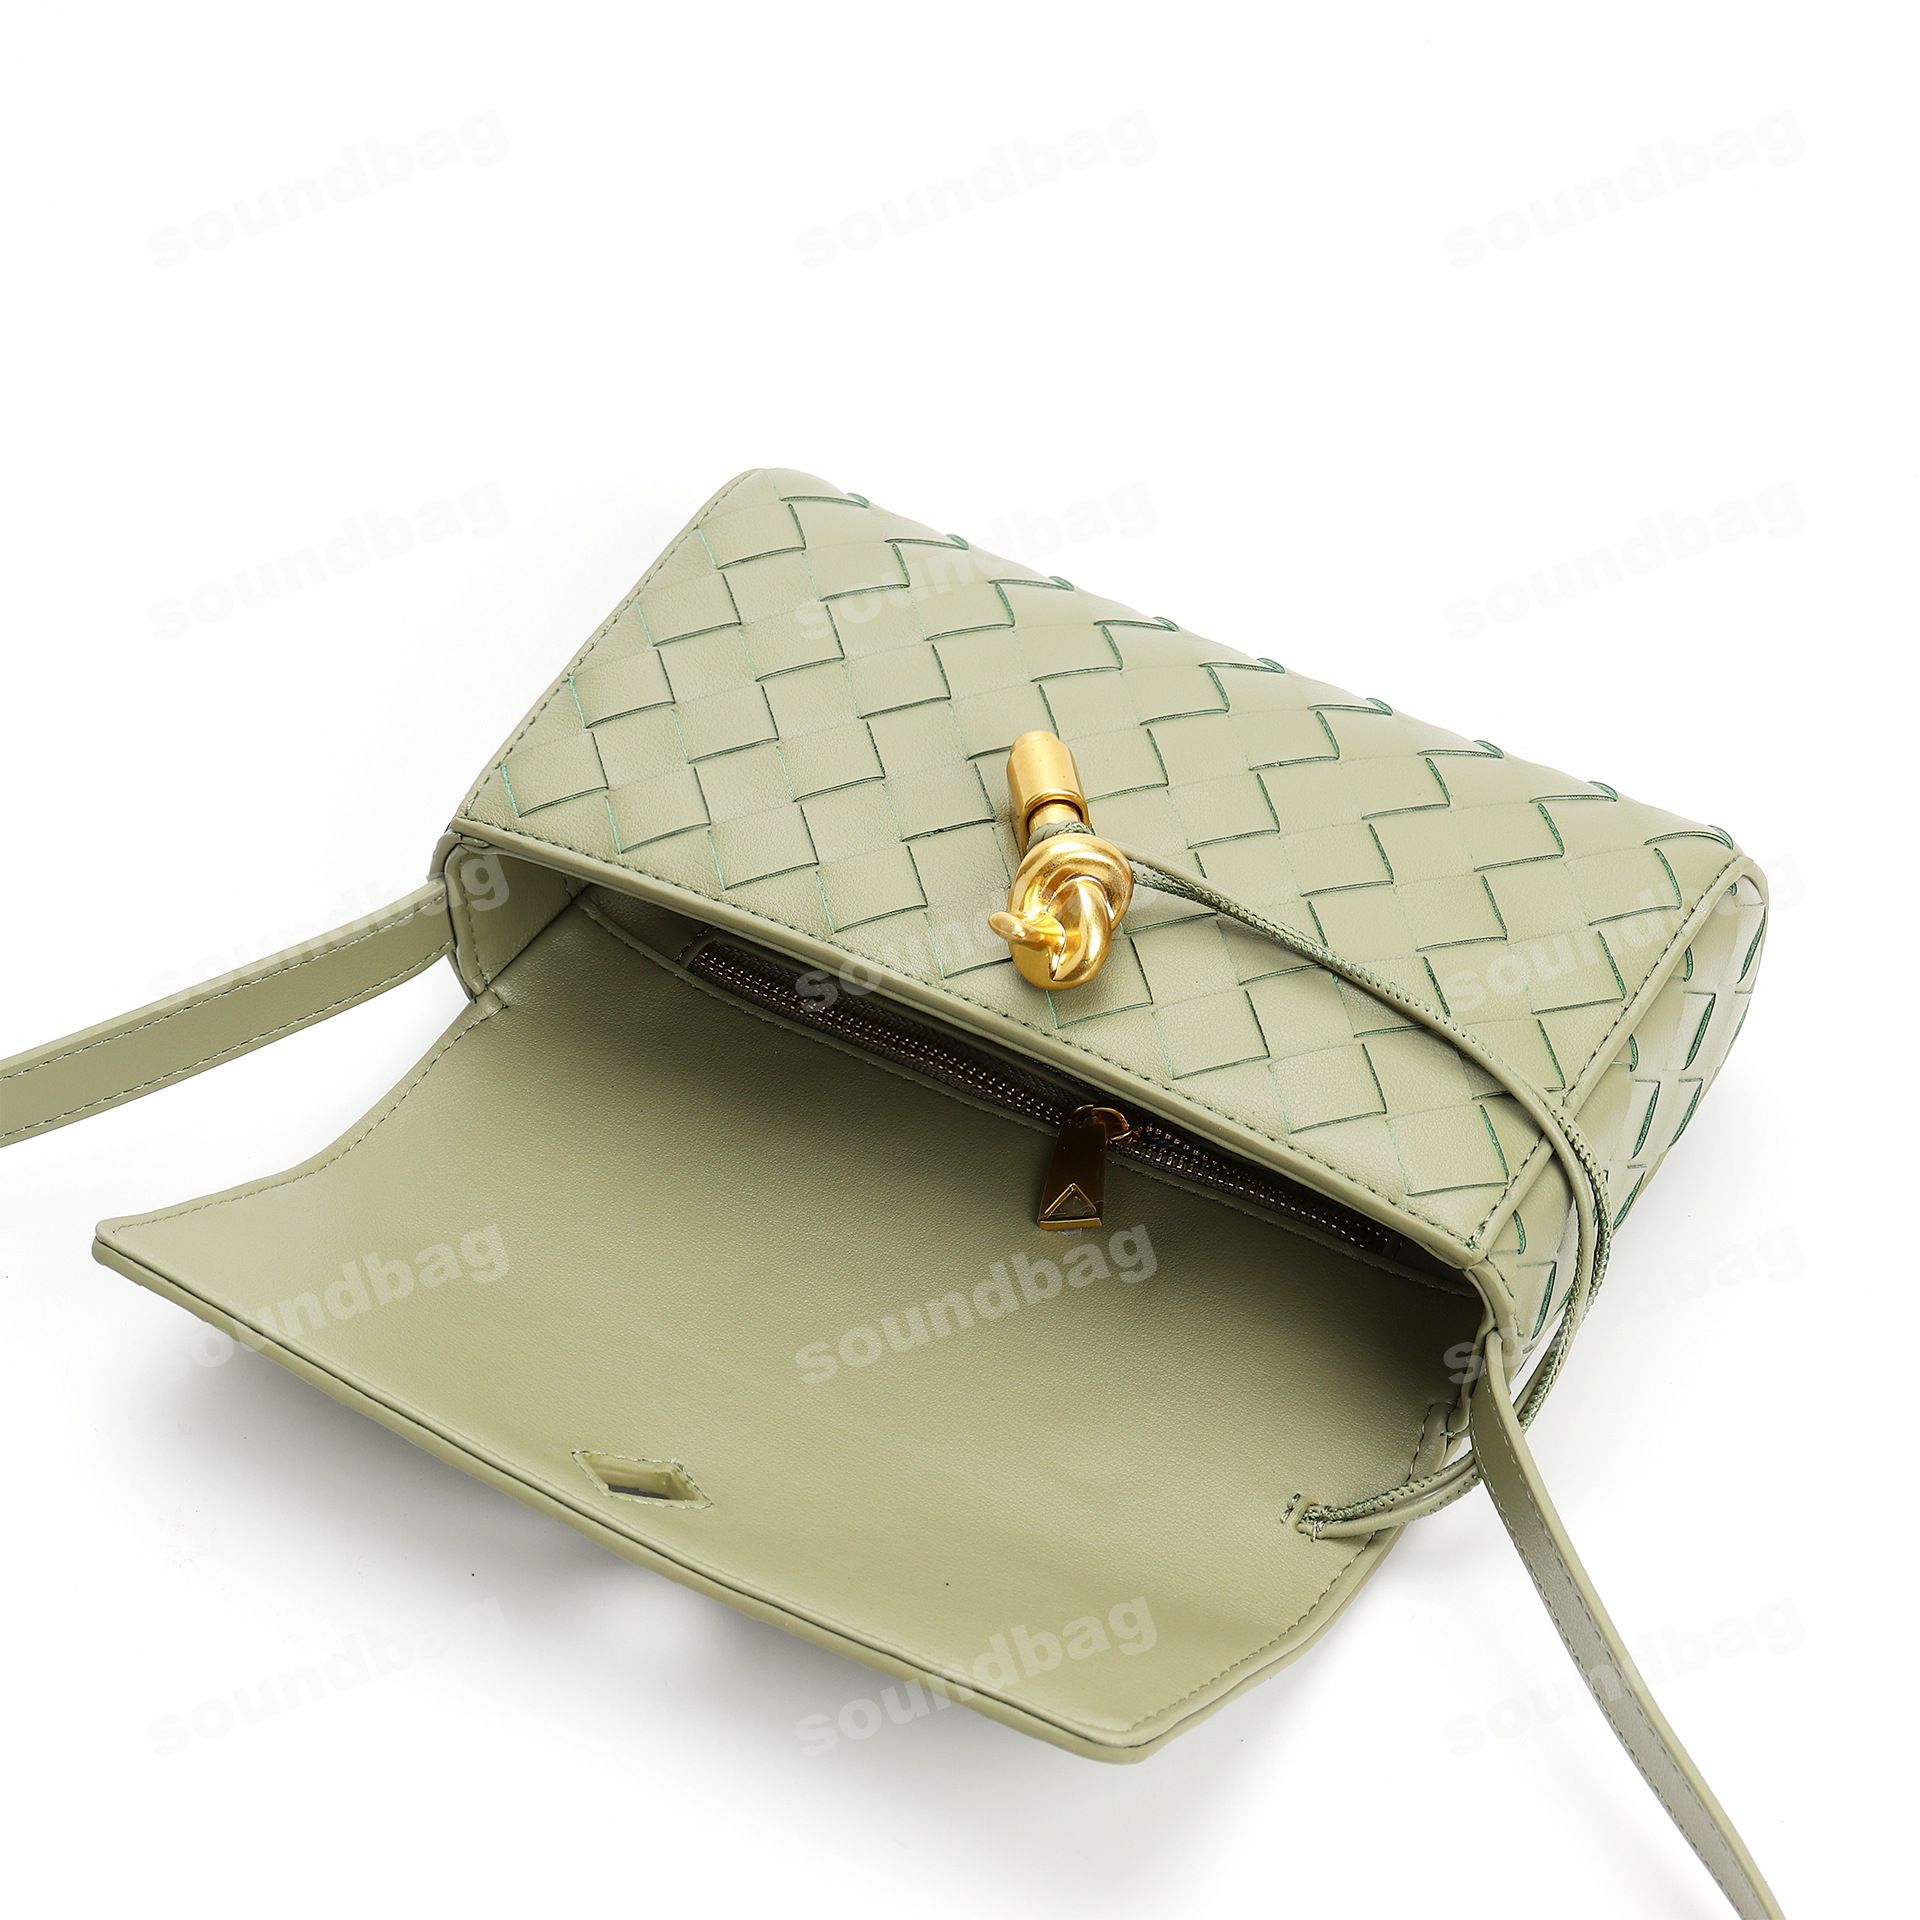 Evening Woven Clutch: Handcrafted, Metal Clasp Front Flap Lock ,Chic Grid with Golden Hardware - Elegant Small Square Shoulder & Crossbody Bag Women Leather Bag